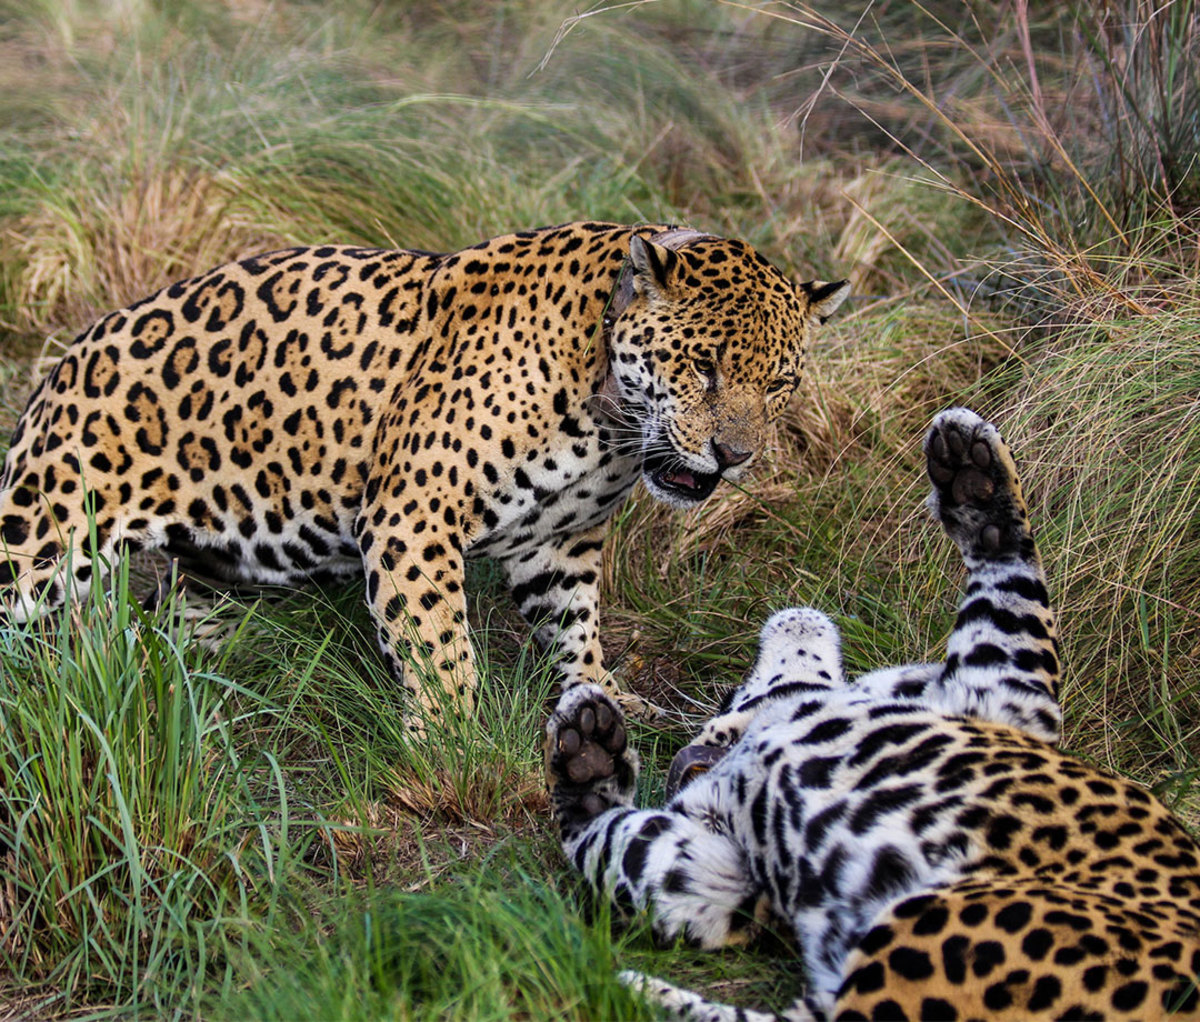 Iberá may soon be one of the best places to see jaguars in the wild